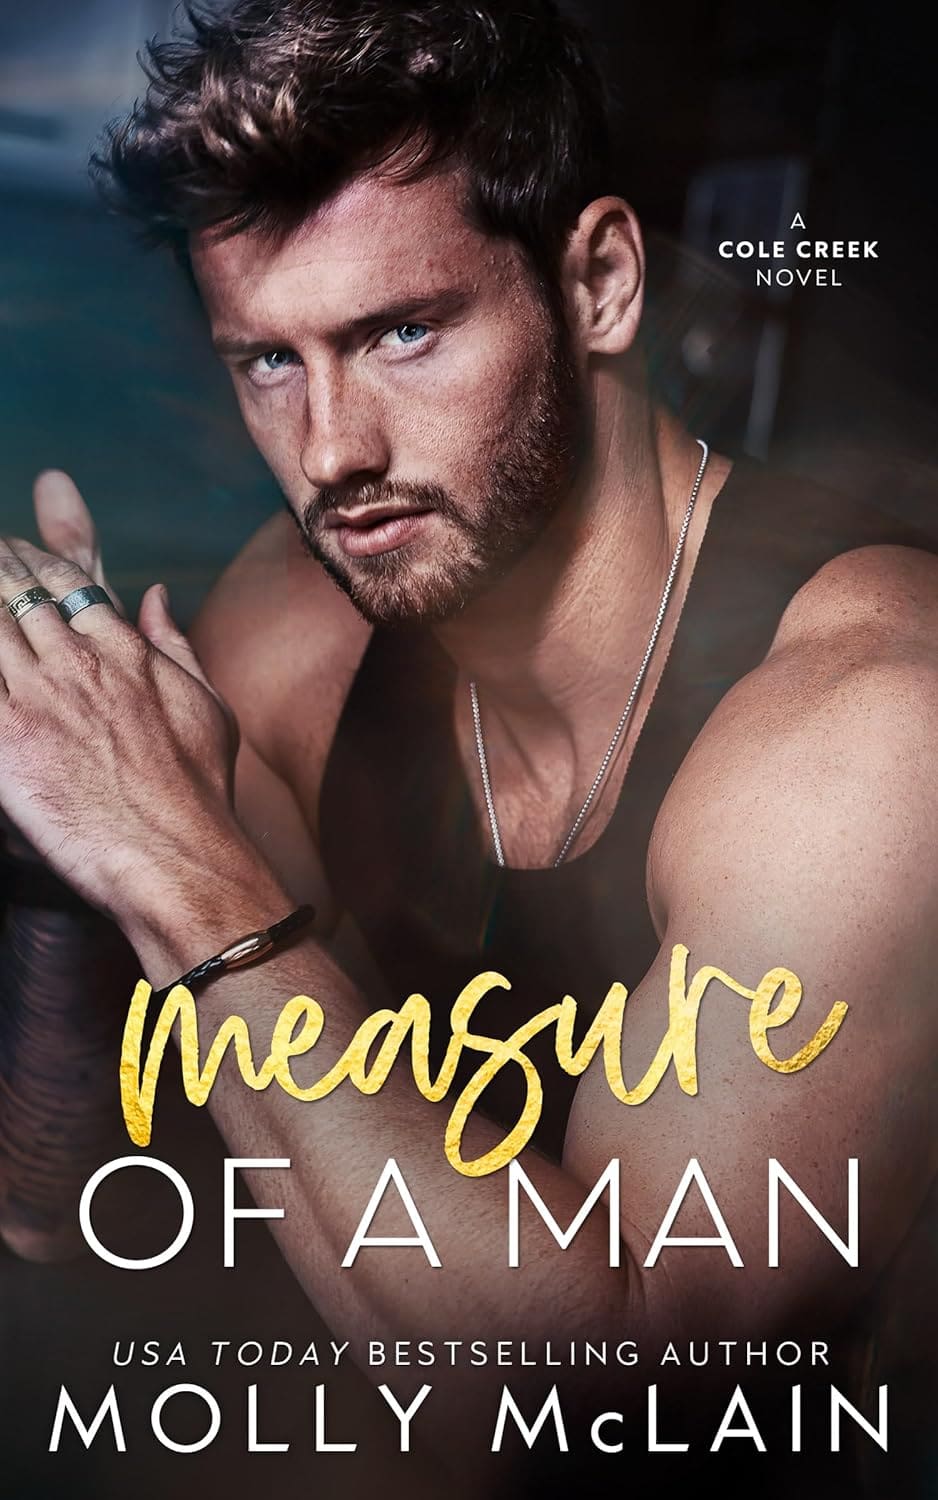 Model cover of messy light brown haired man for Molly McLain's Measure of a Man book